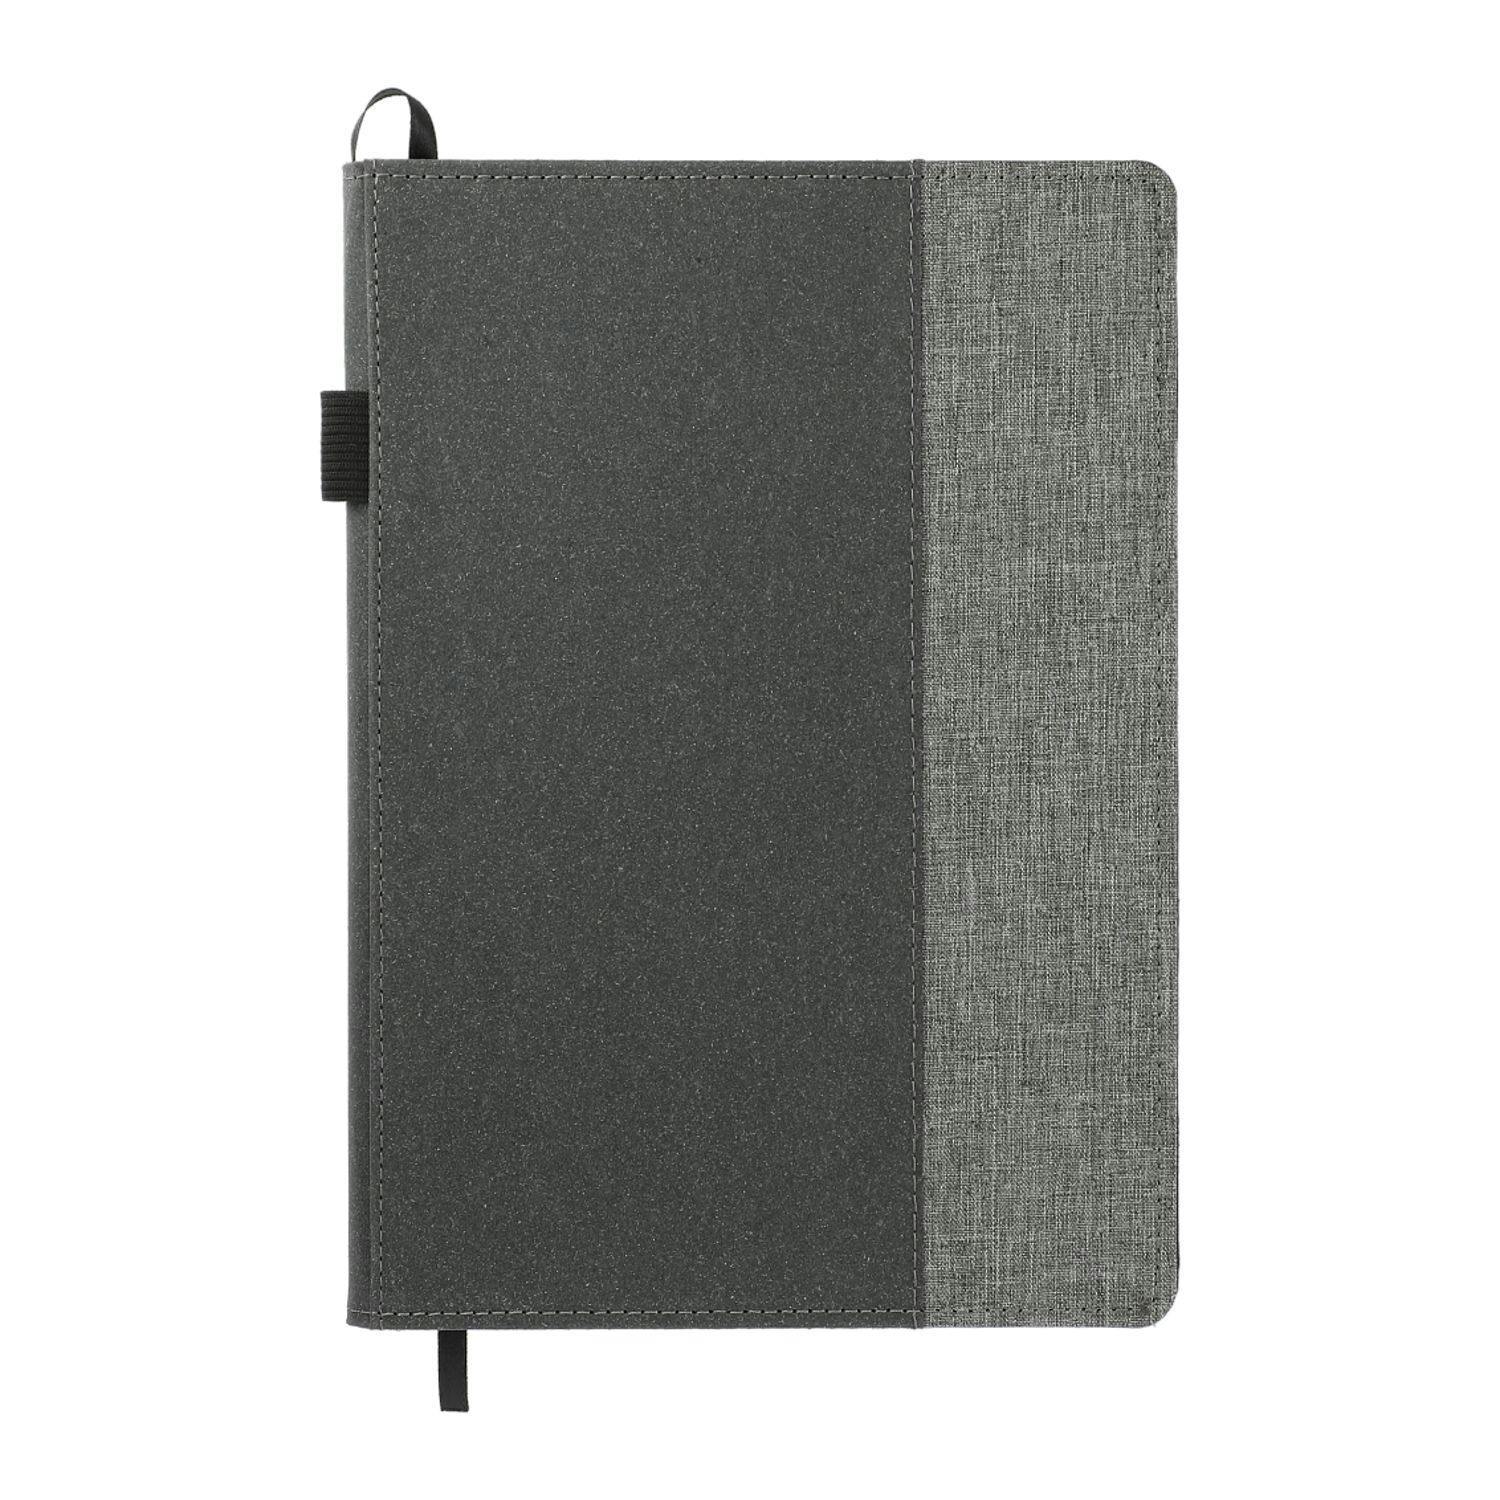 7" x 10" Reclaim RPET Refillable JournalBook® - additional Image 1